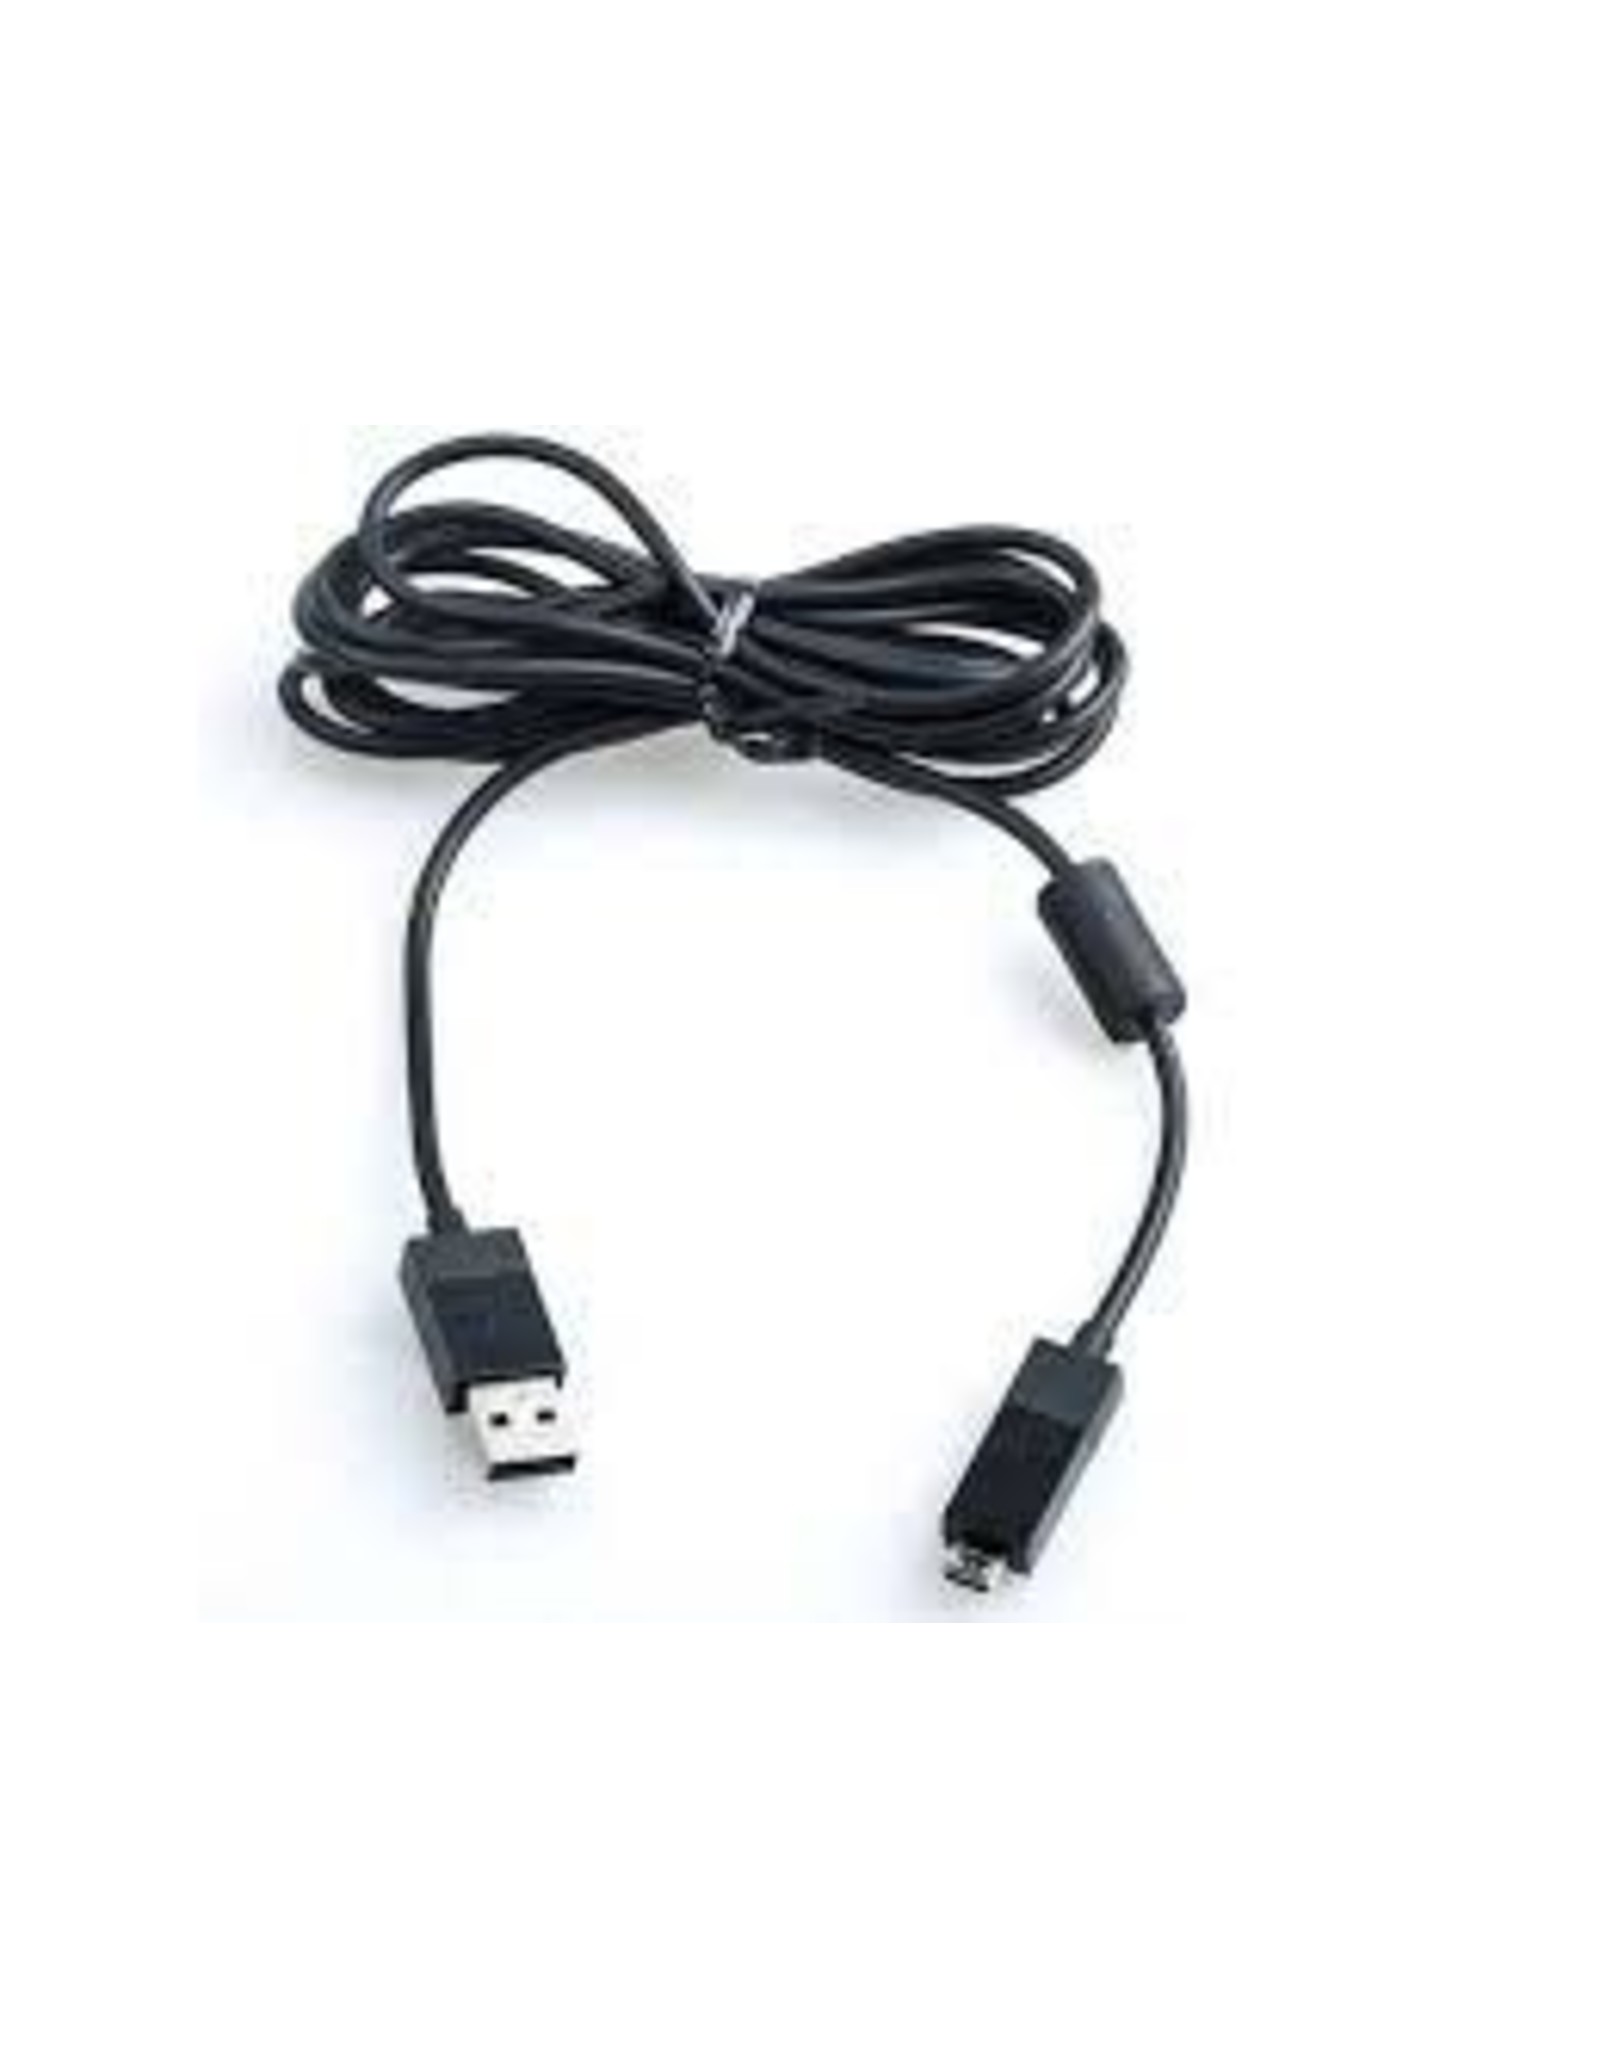 Xbox One Xbox One Charge Cable (Used)